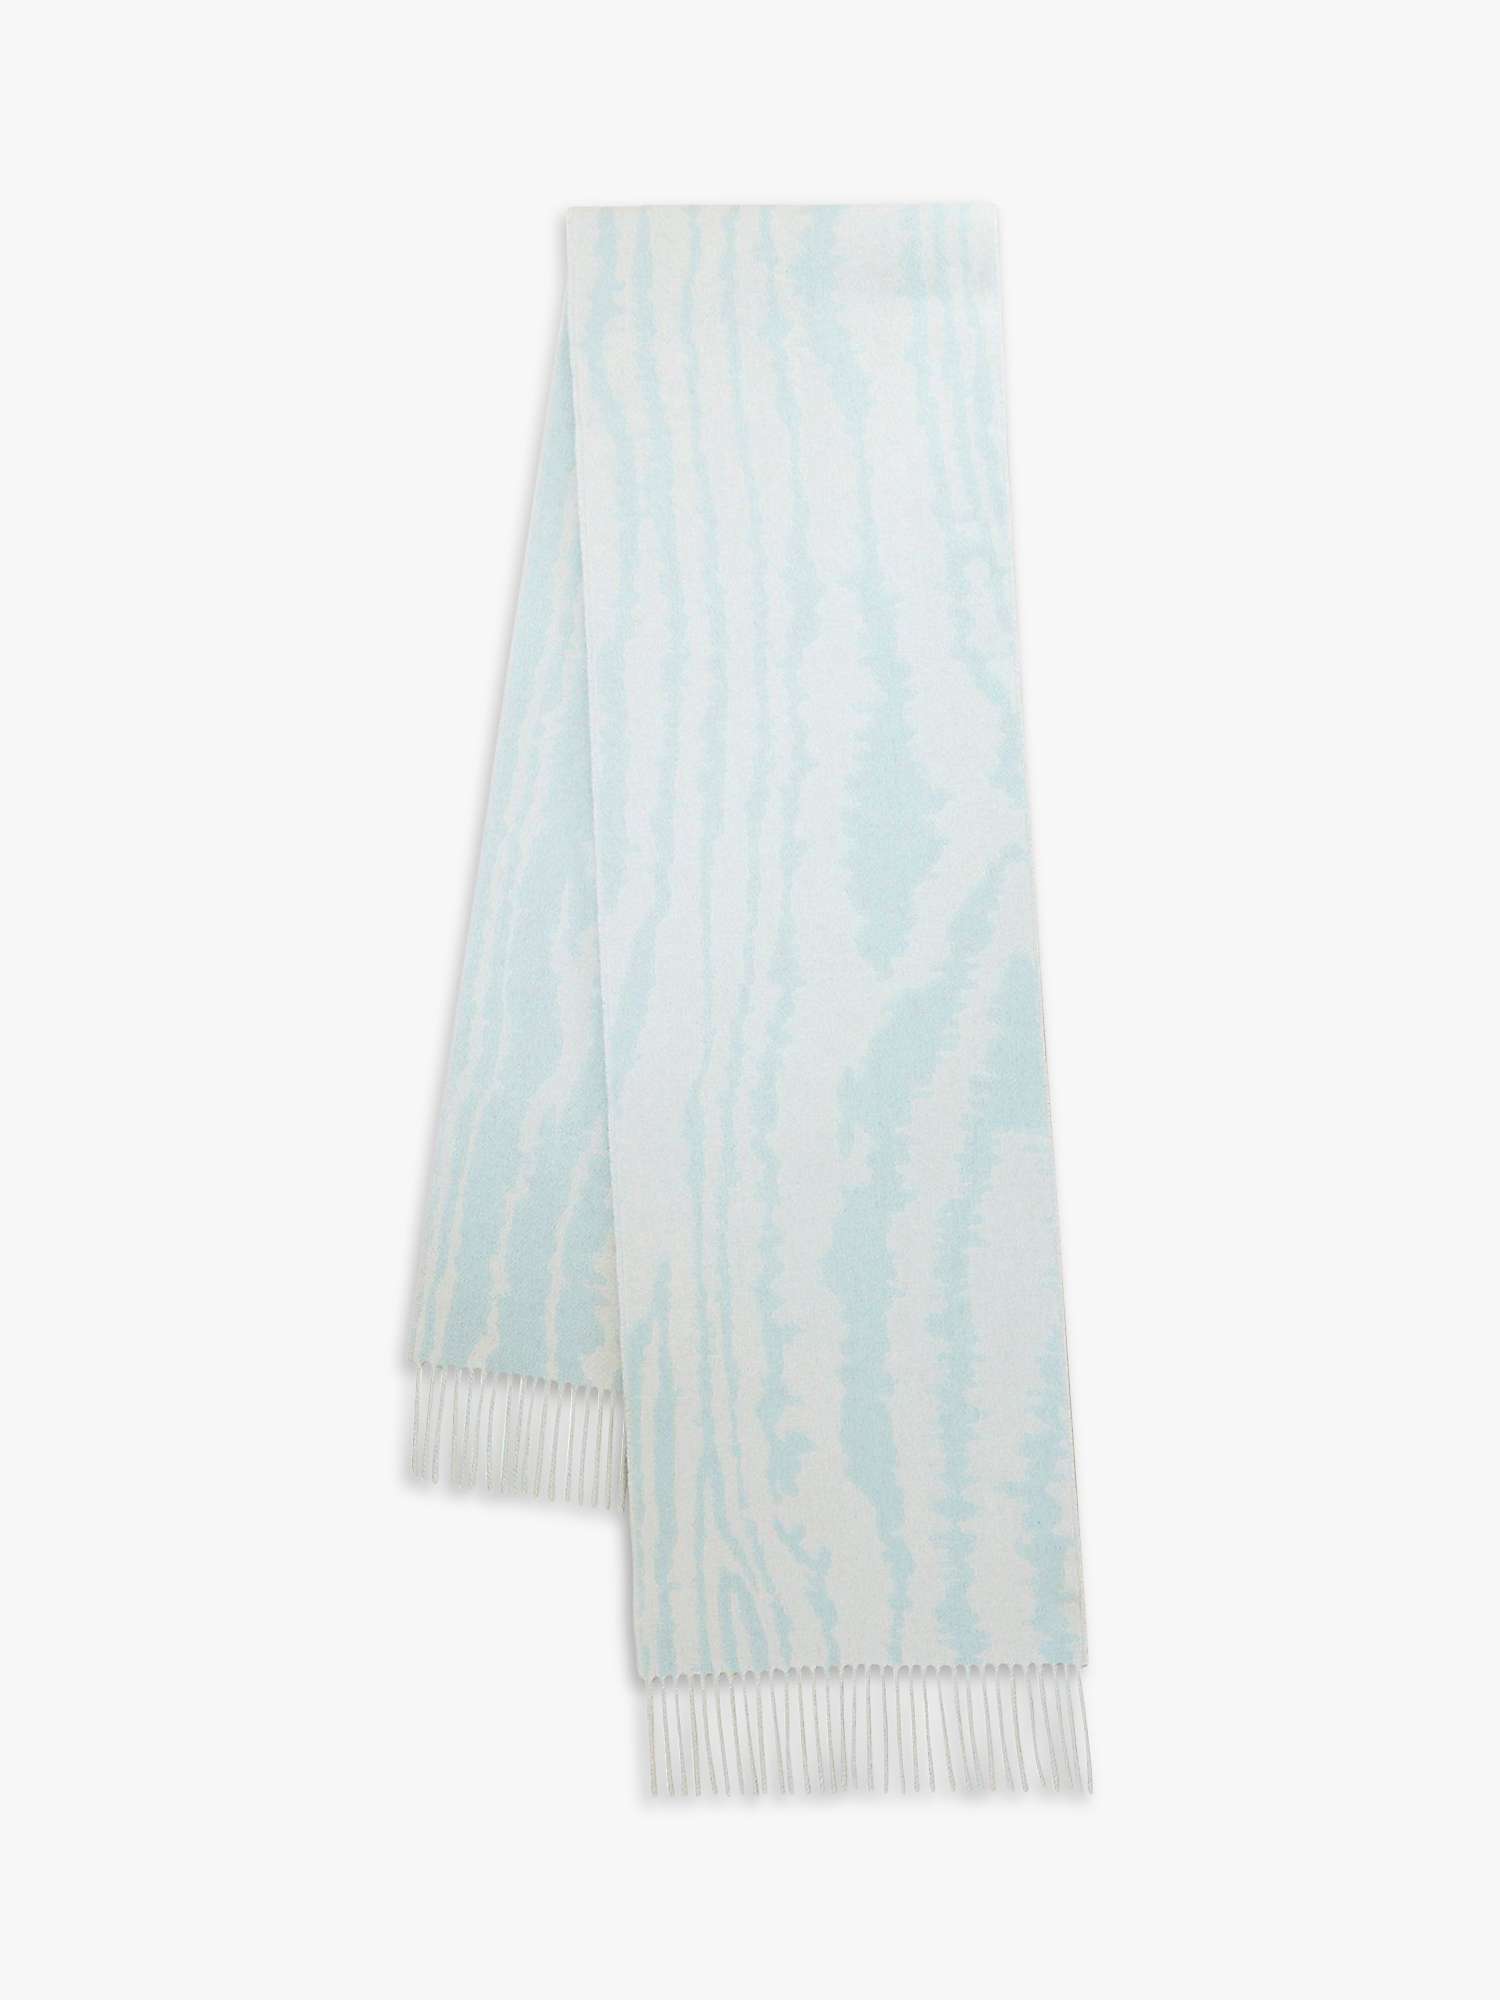 Buy Mulberry Wool Cashmere Moire Scarf Online at johnlewis.com